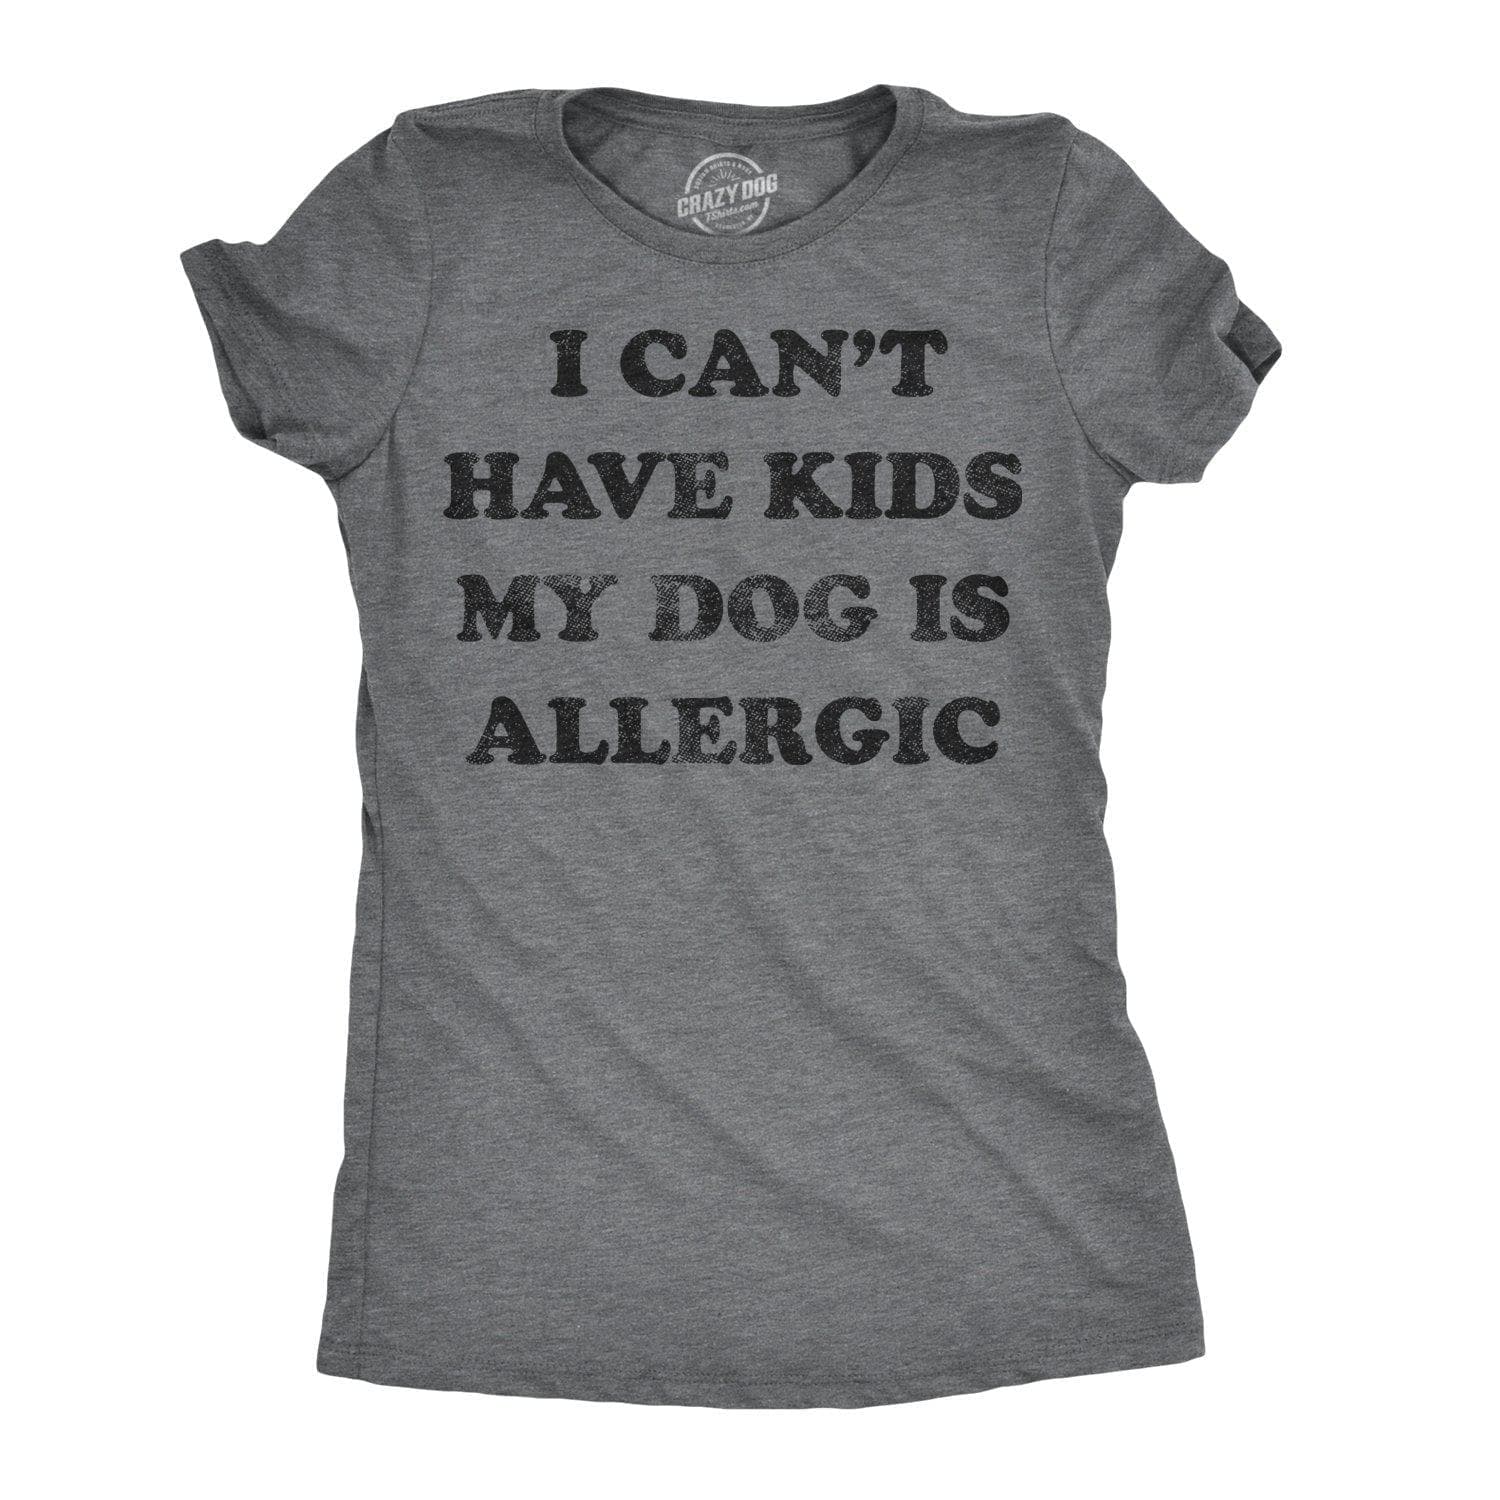 I Can't Have Kids My Dog Is Allergic Women's Tshirt  -  Crazy Dog T-Shirts